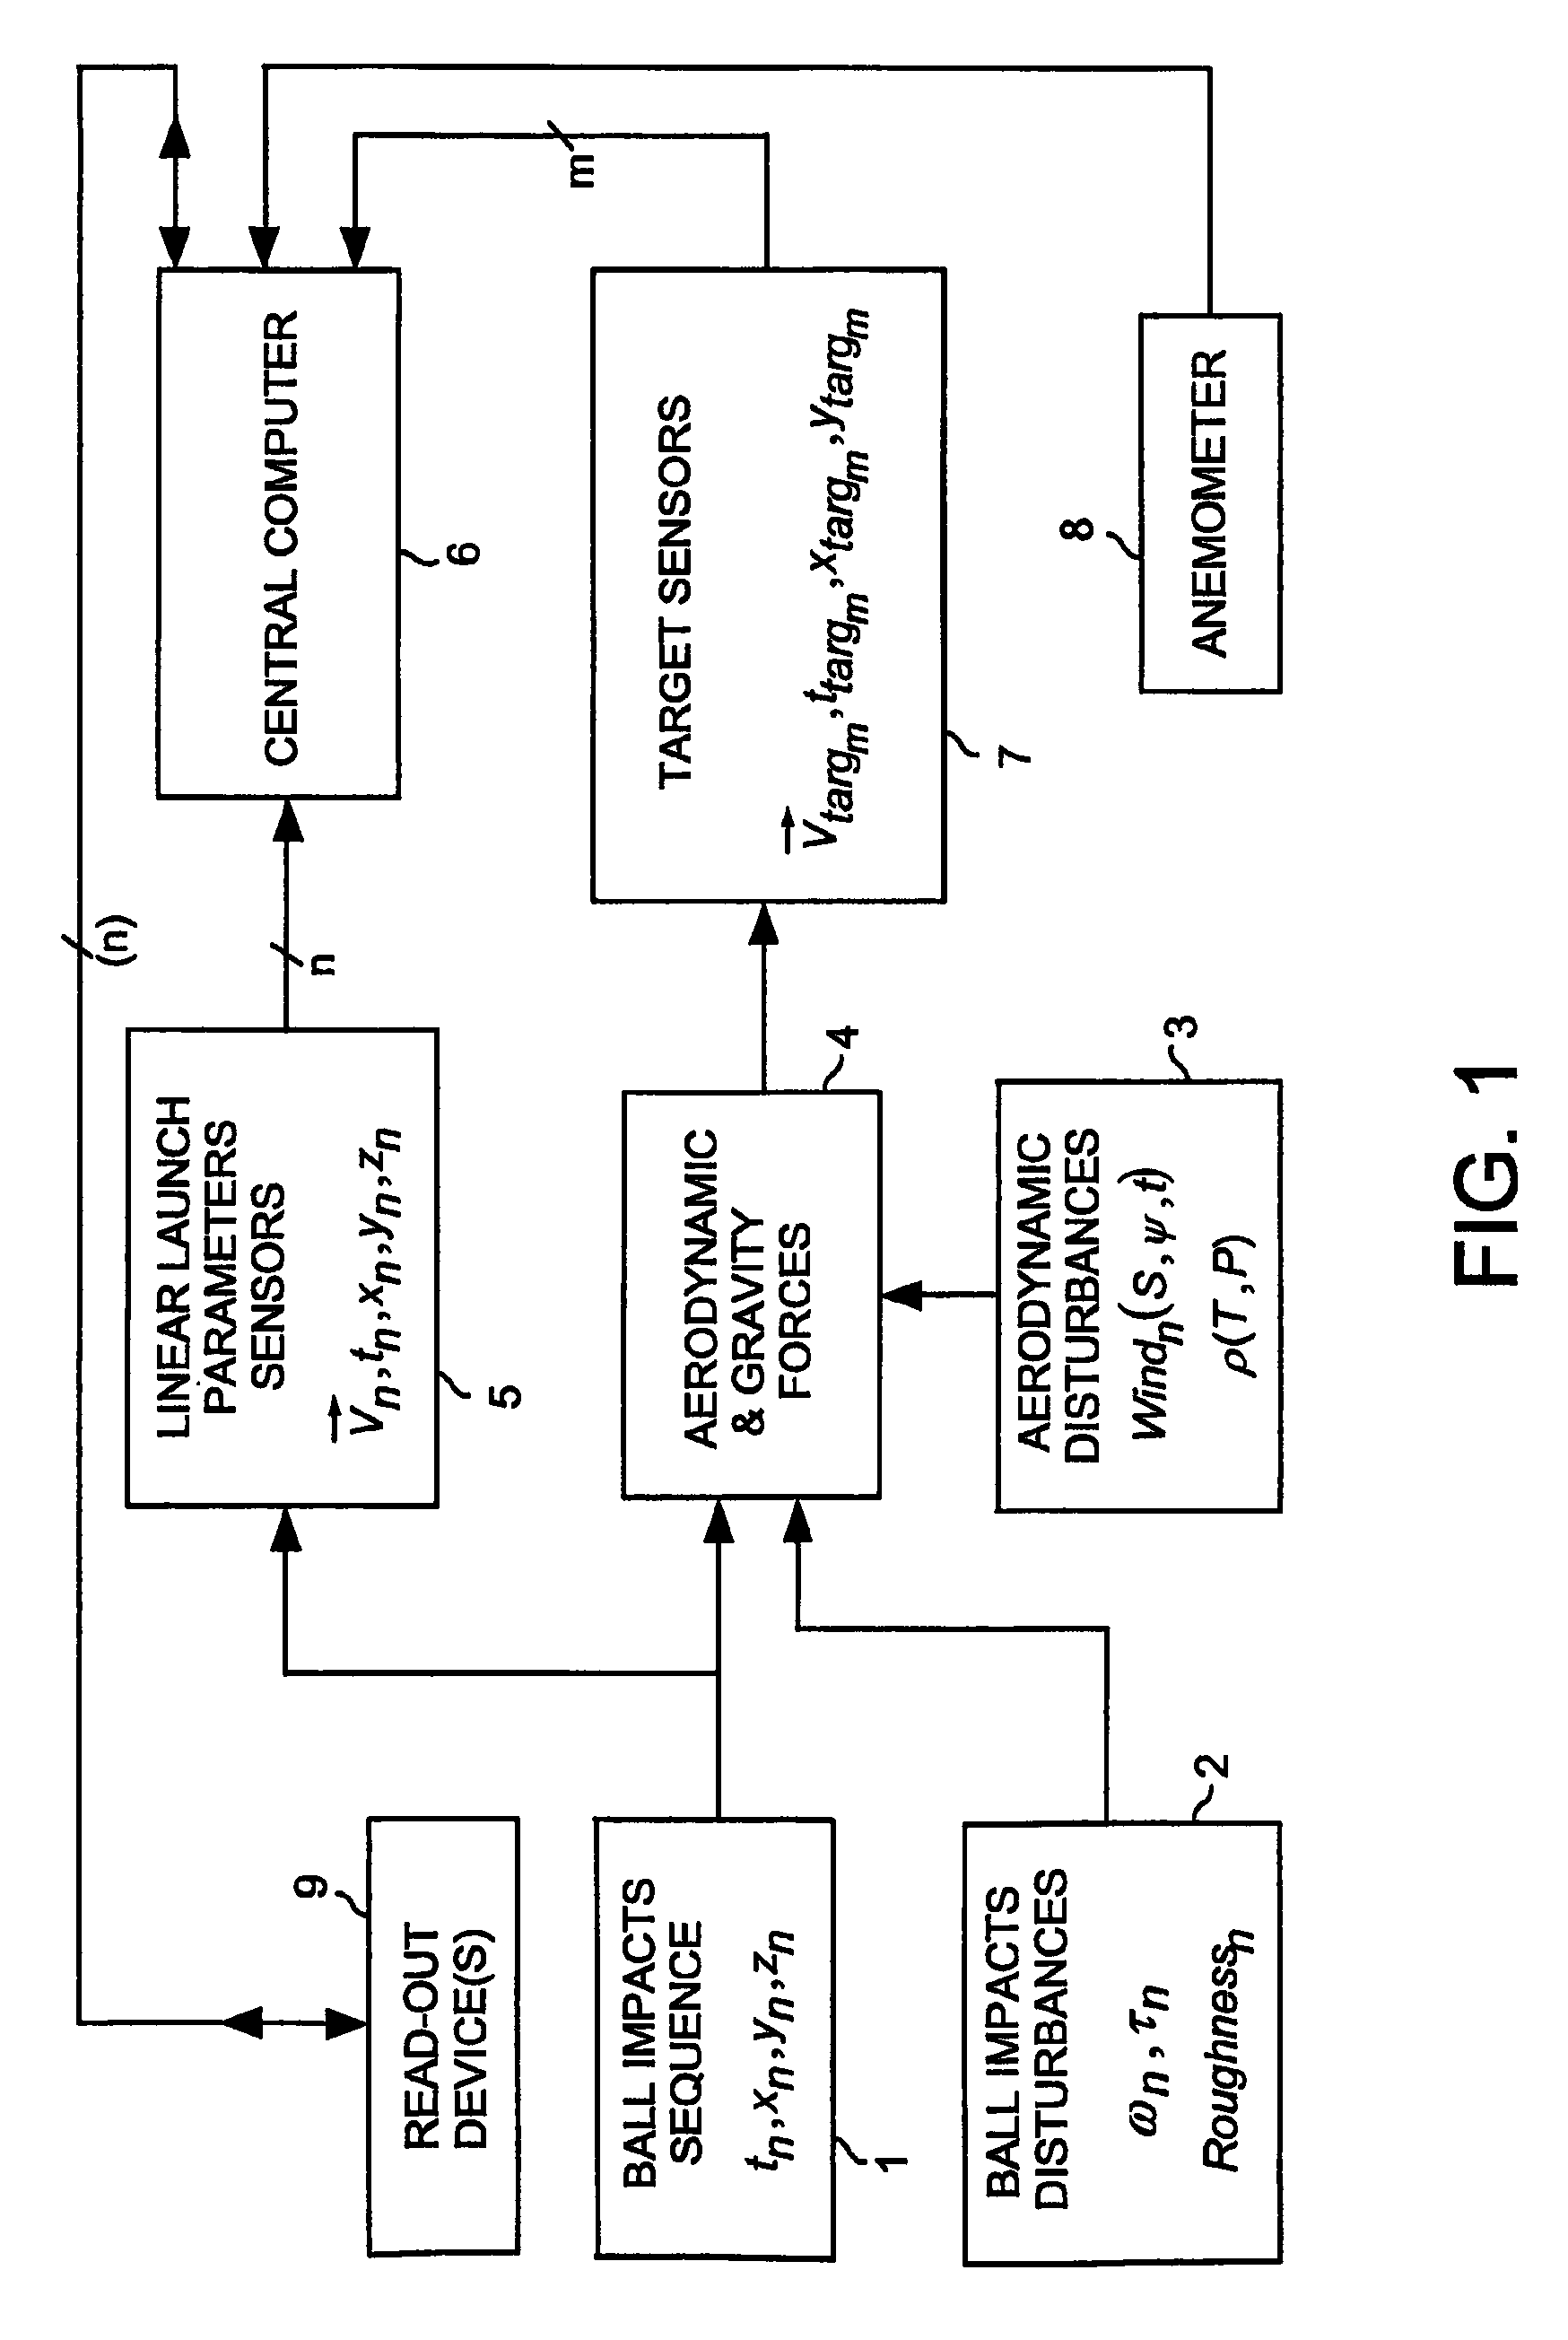 Methods and systems for identifying the launch positions of descending golf balls